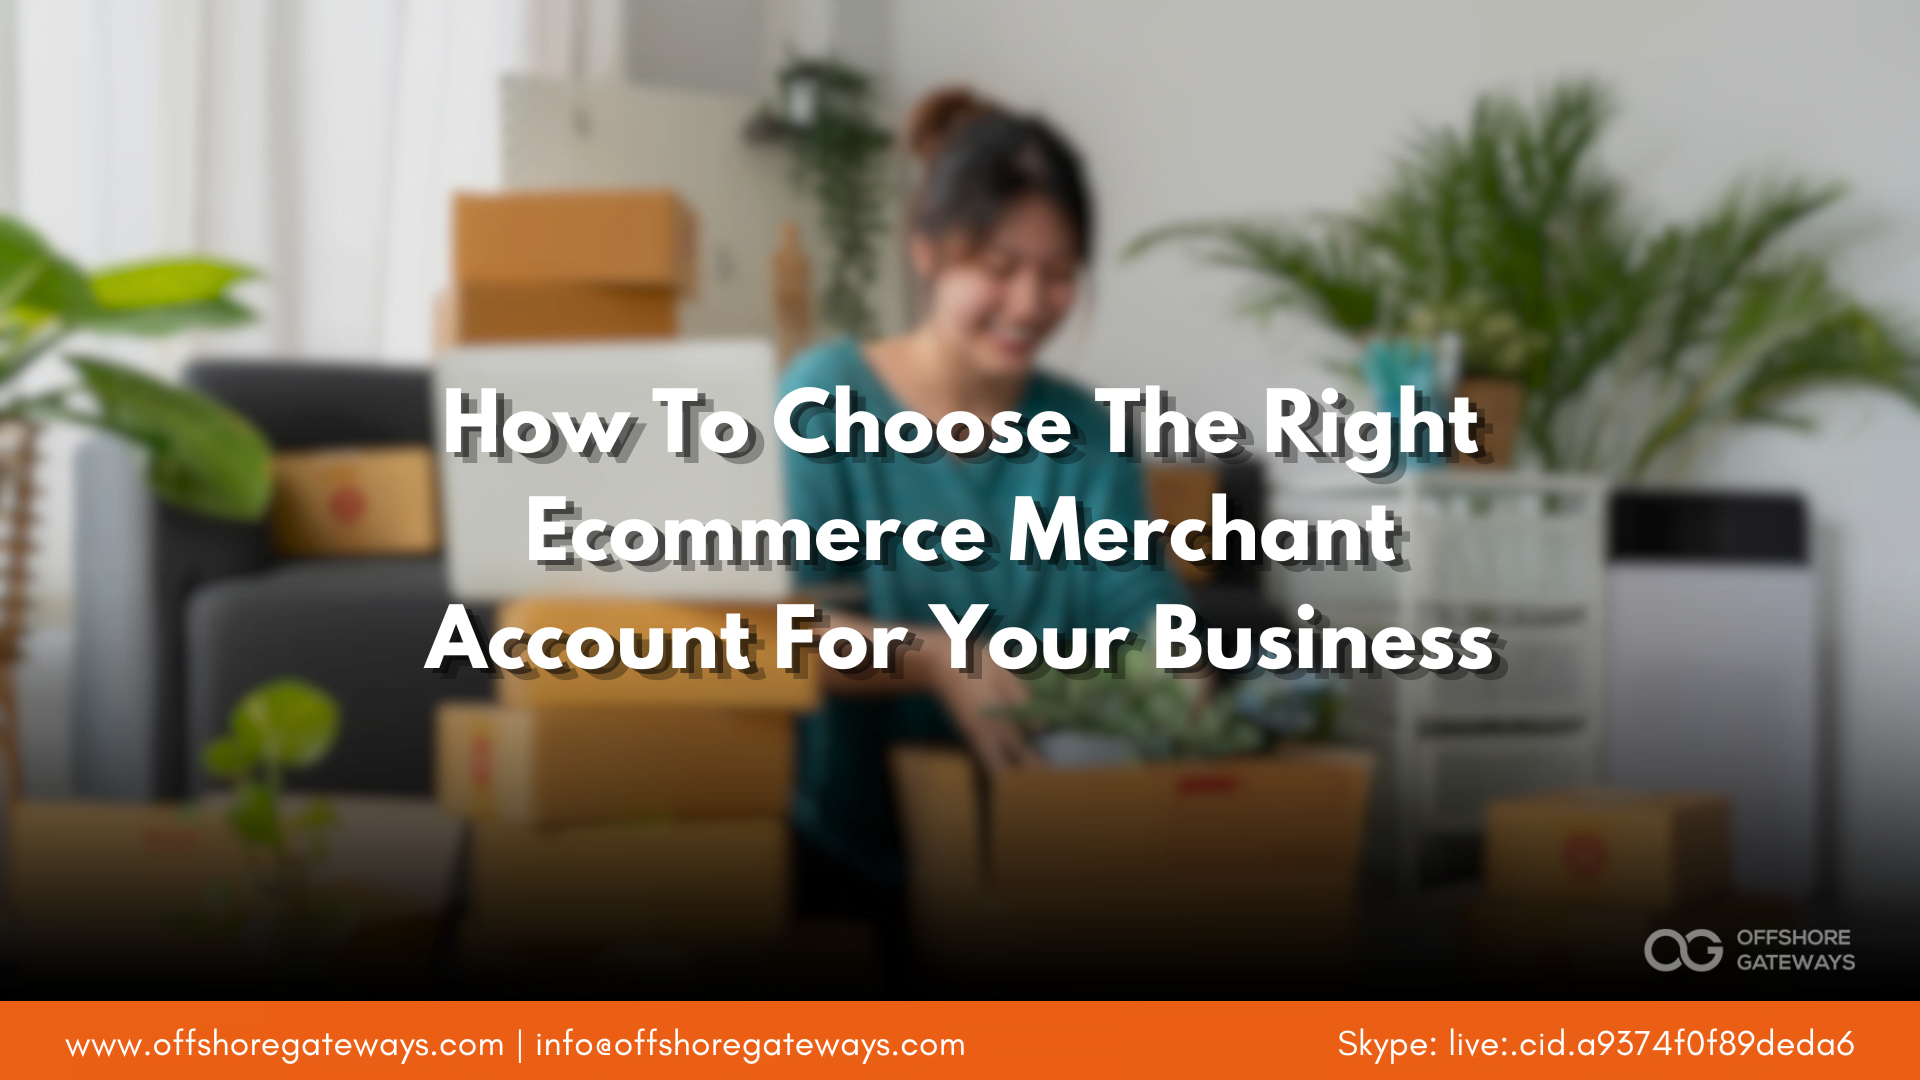 how-to-choose-the-right-ecommerce-merchant-account-for-your-business-offshoregateways